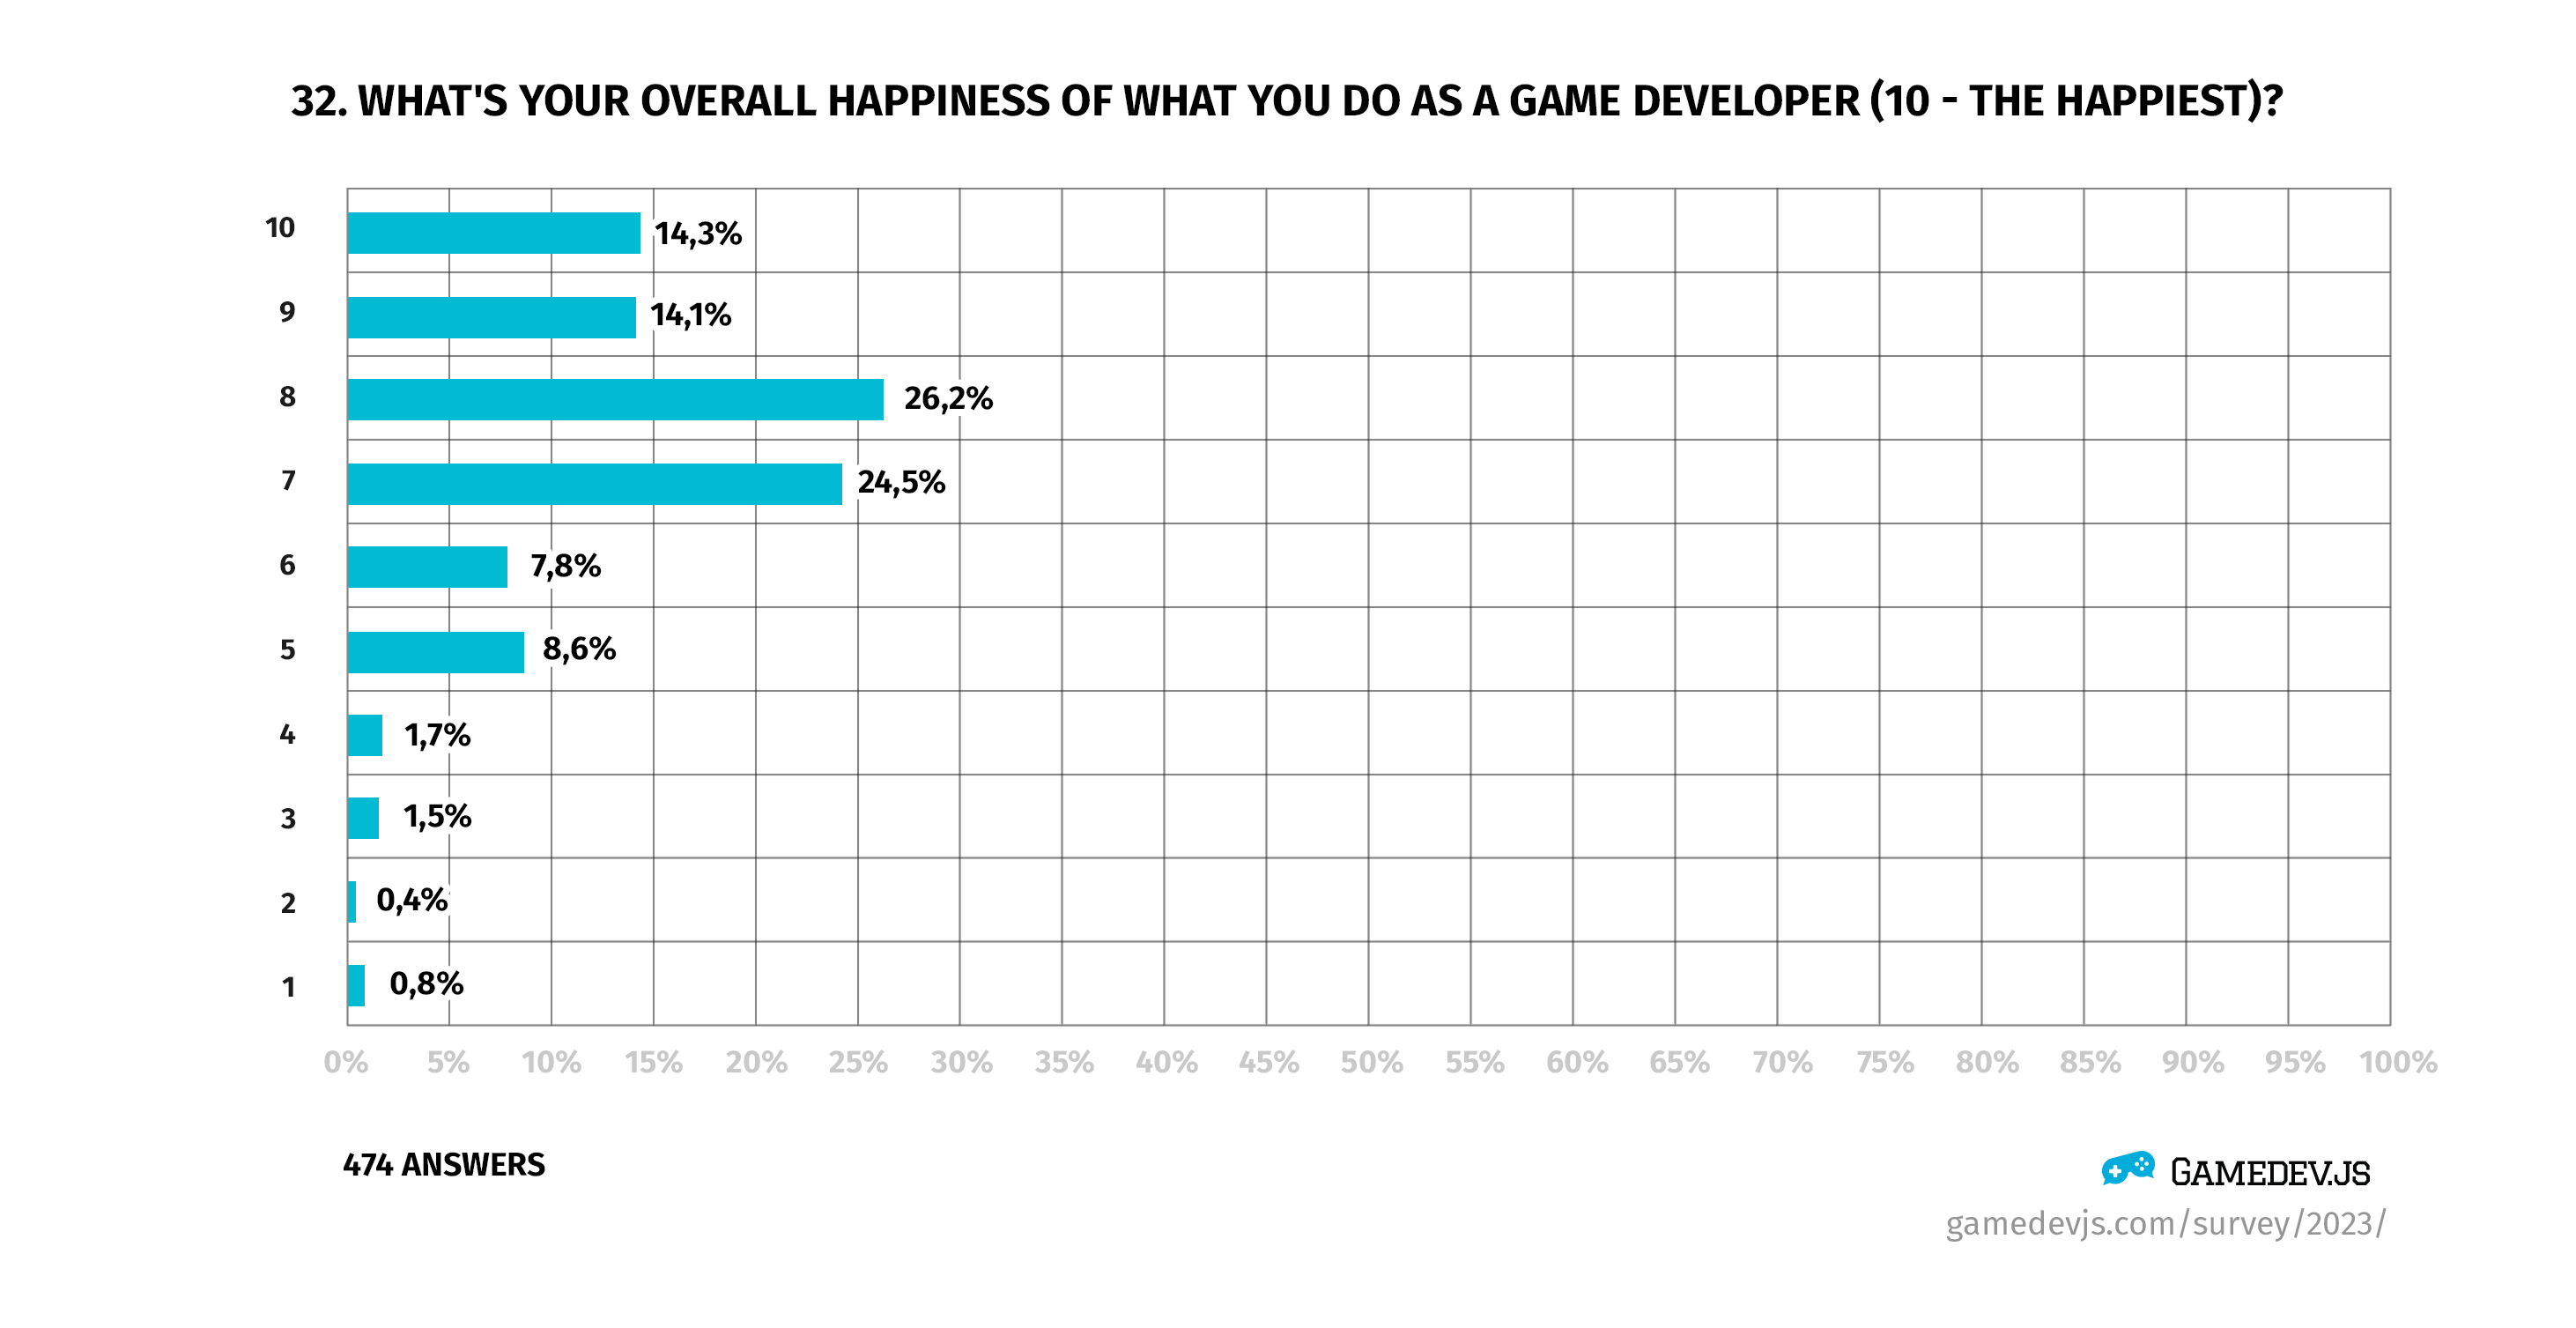 Gamedev.js Survey 2023 - Question #32: What's your overall happiness of what you do as a game developer (10 - the happiest)?